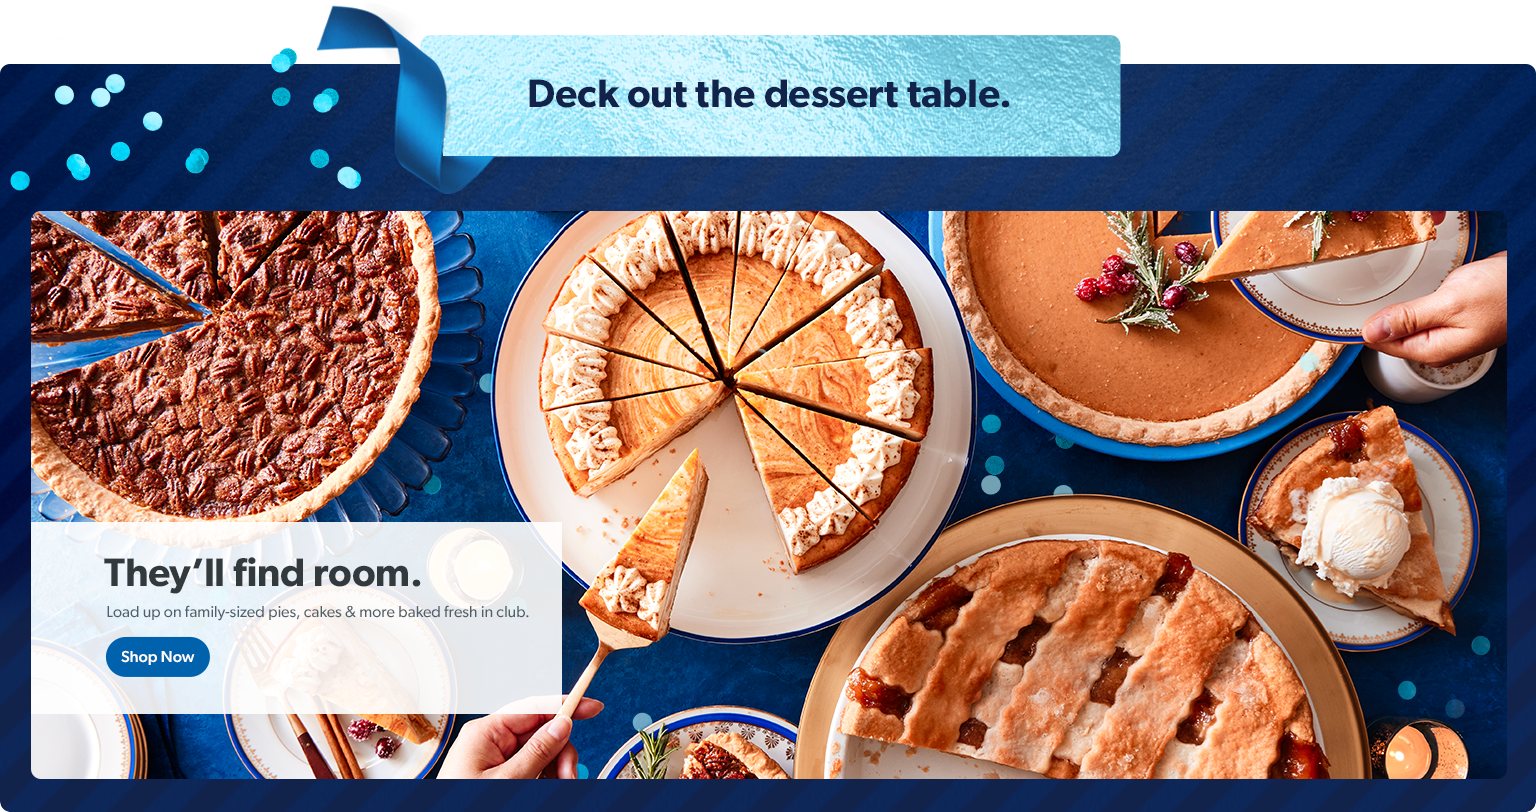 Deck out the dessert table. They'll find room. Load up on family sized pies, cakes and more baked fresh in club. Shop now.